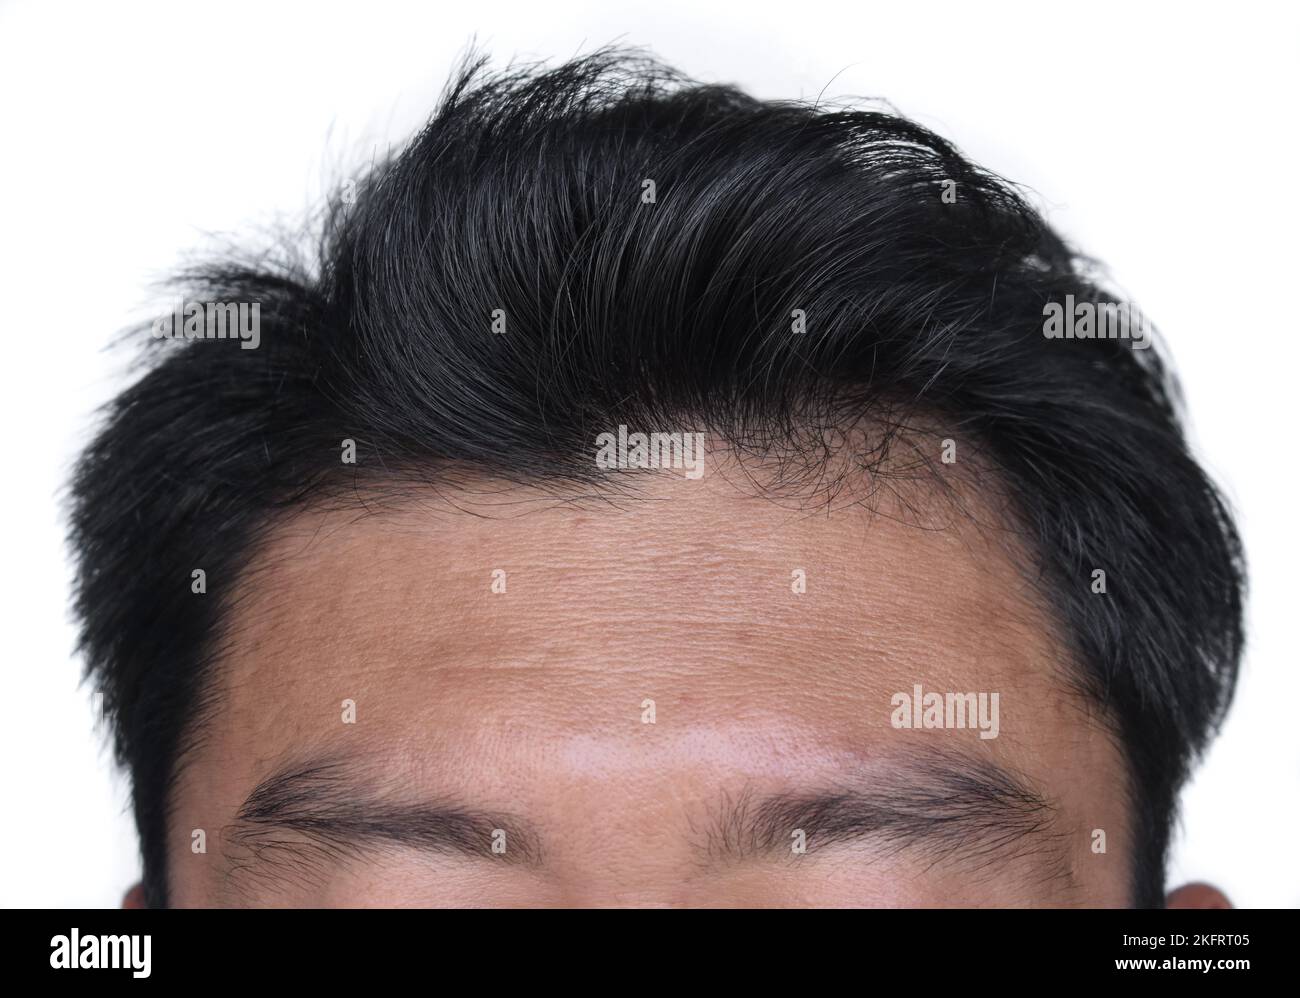 Thinning or sparse hair, male pattern hair loss. Wrinkles or folds in the forehead of Southeast Asian, Chinese man. Stock Photo